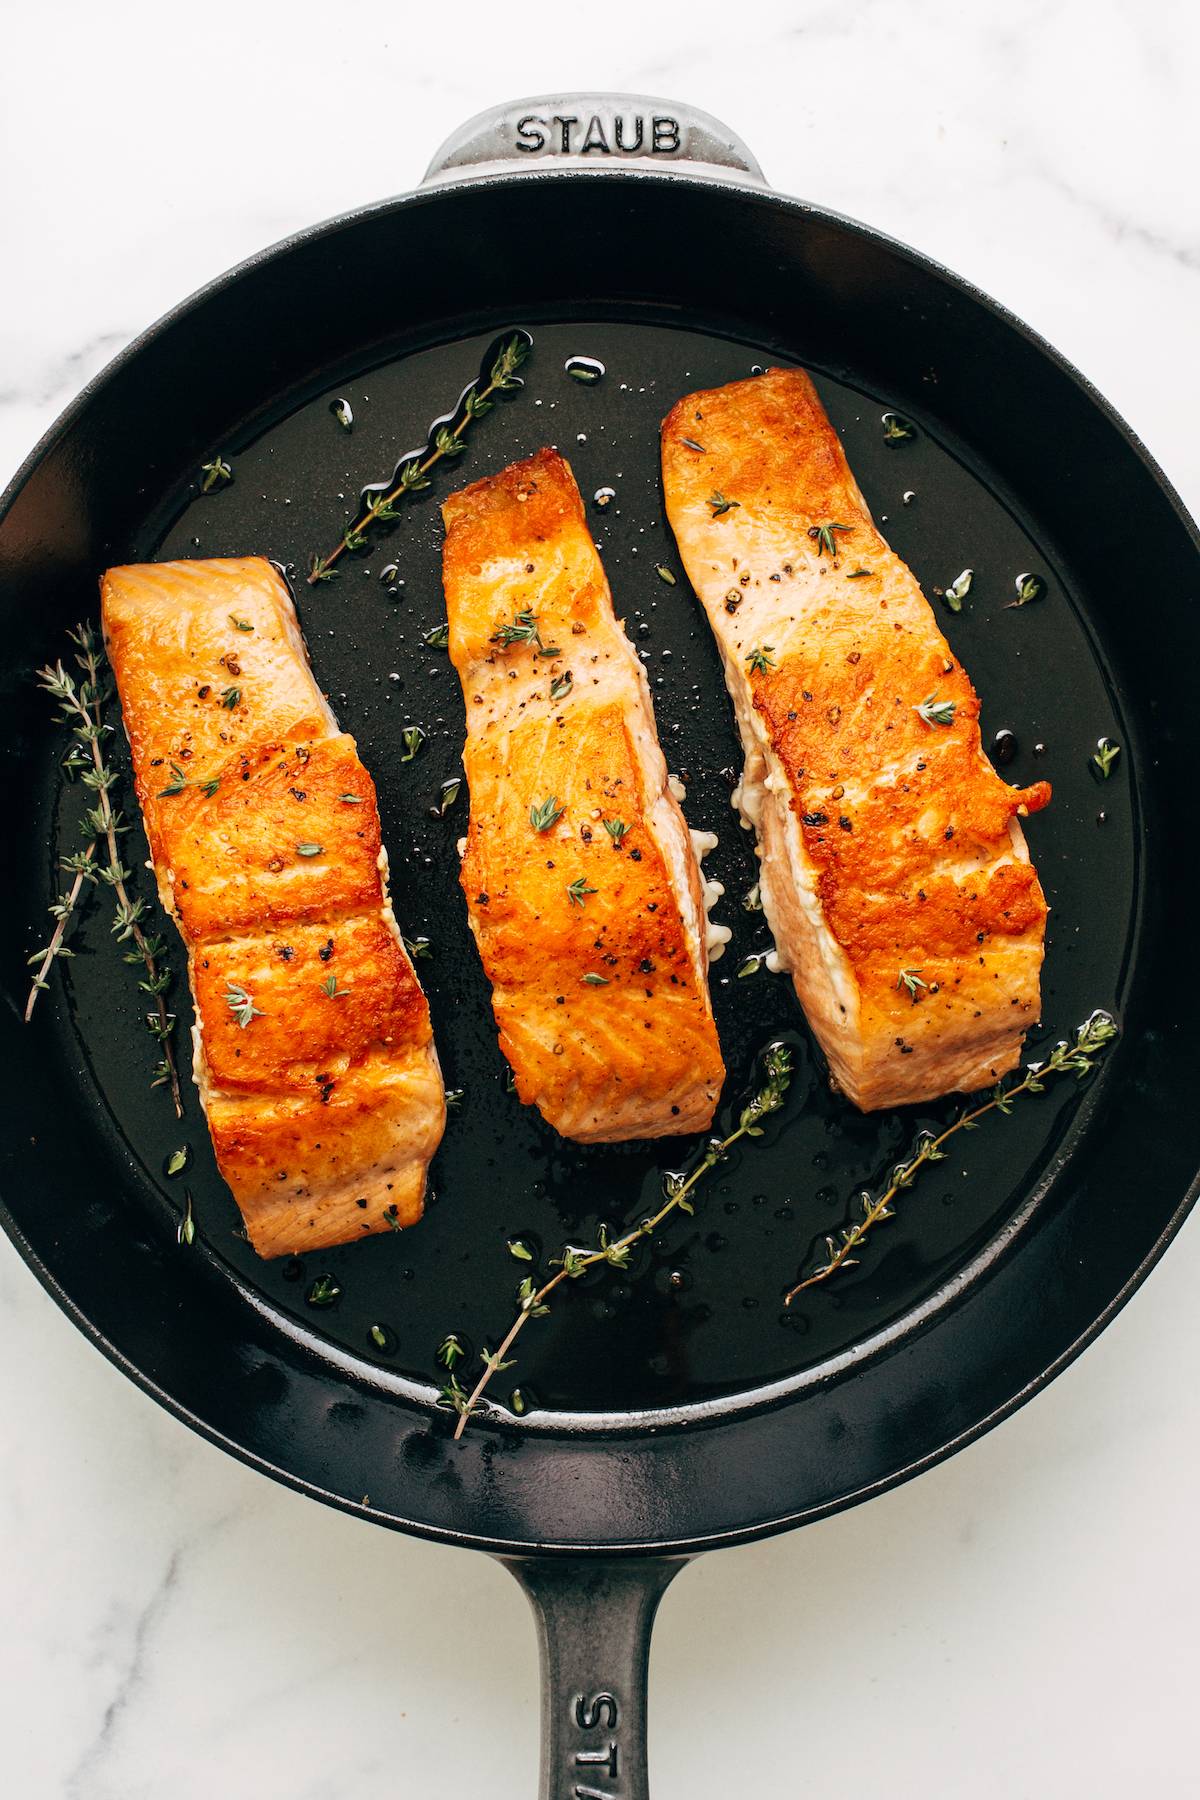 Three fillets of browned salmon in a cast iron pan.